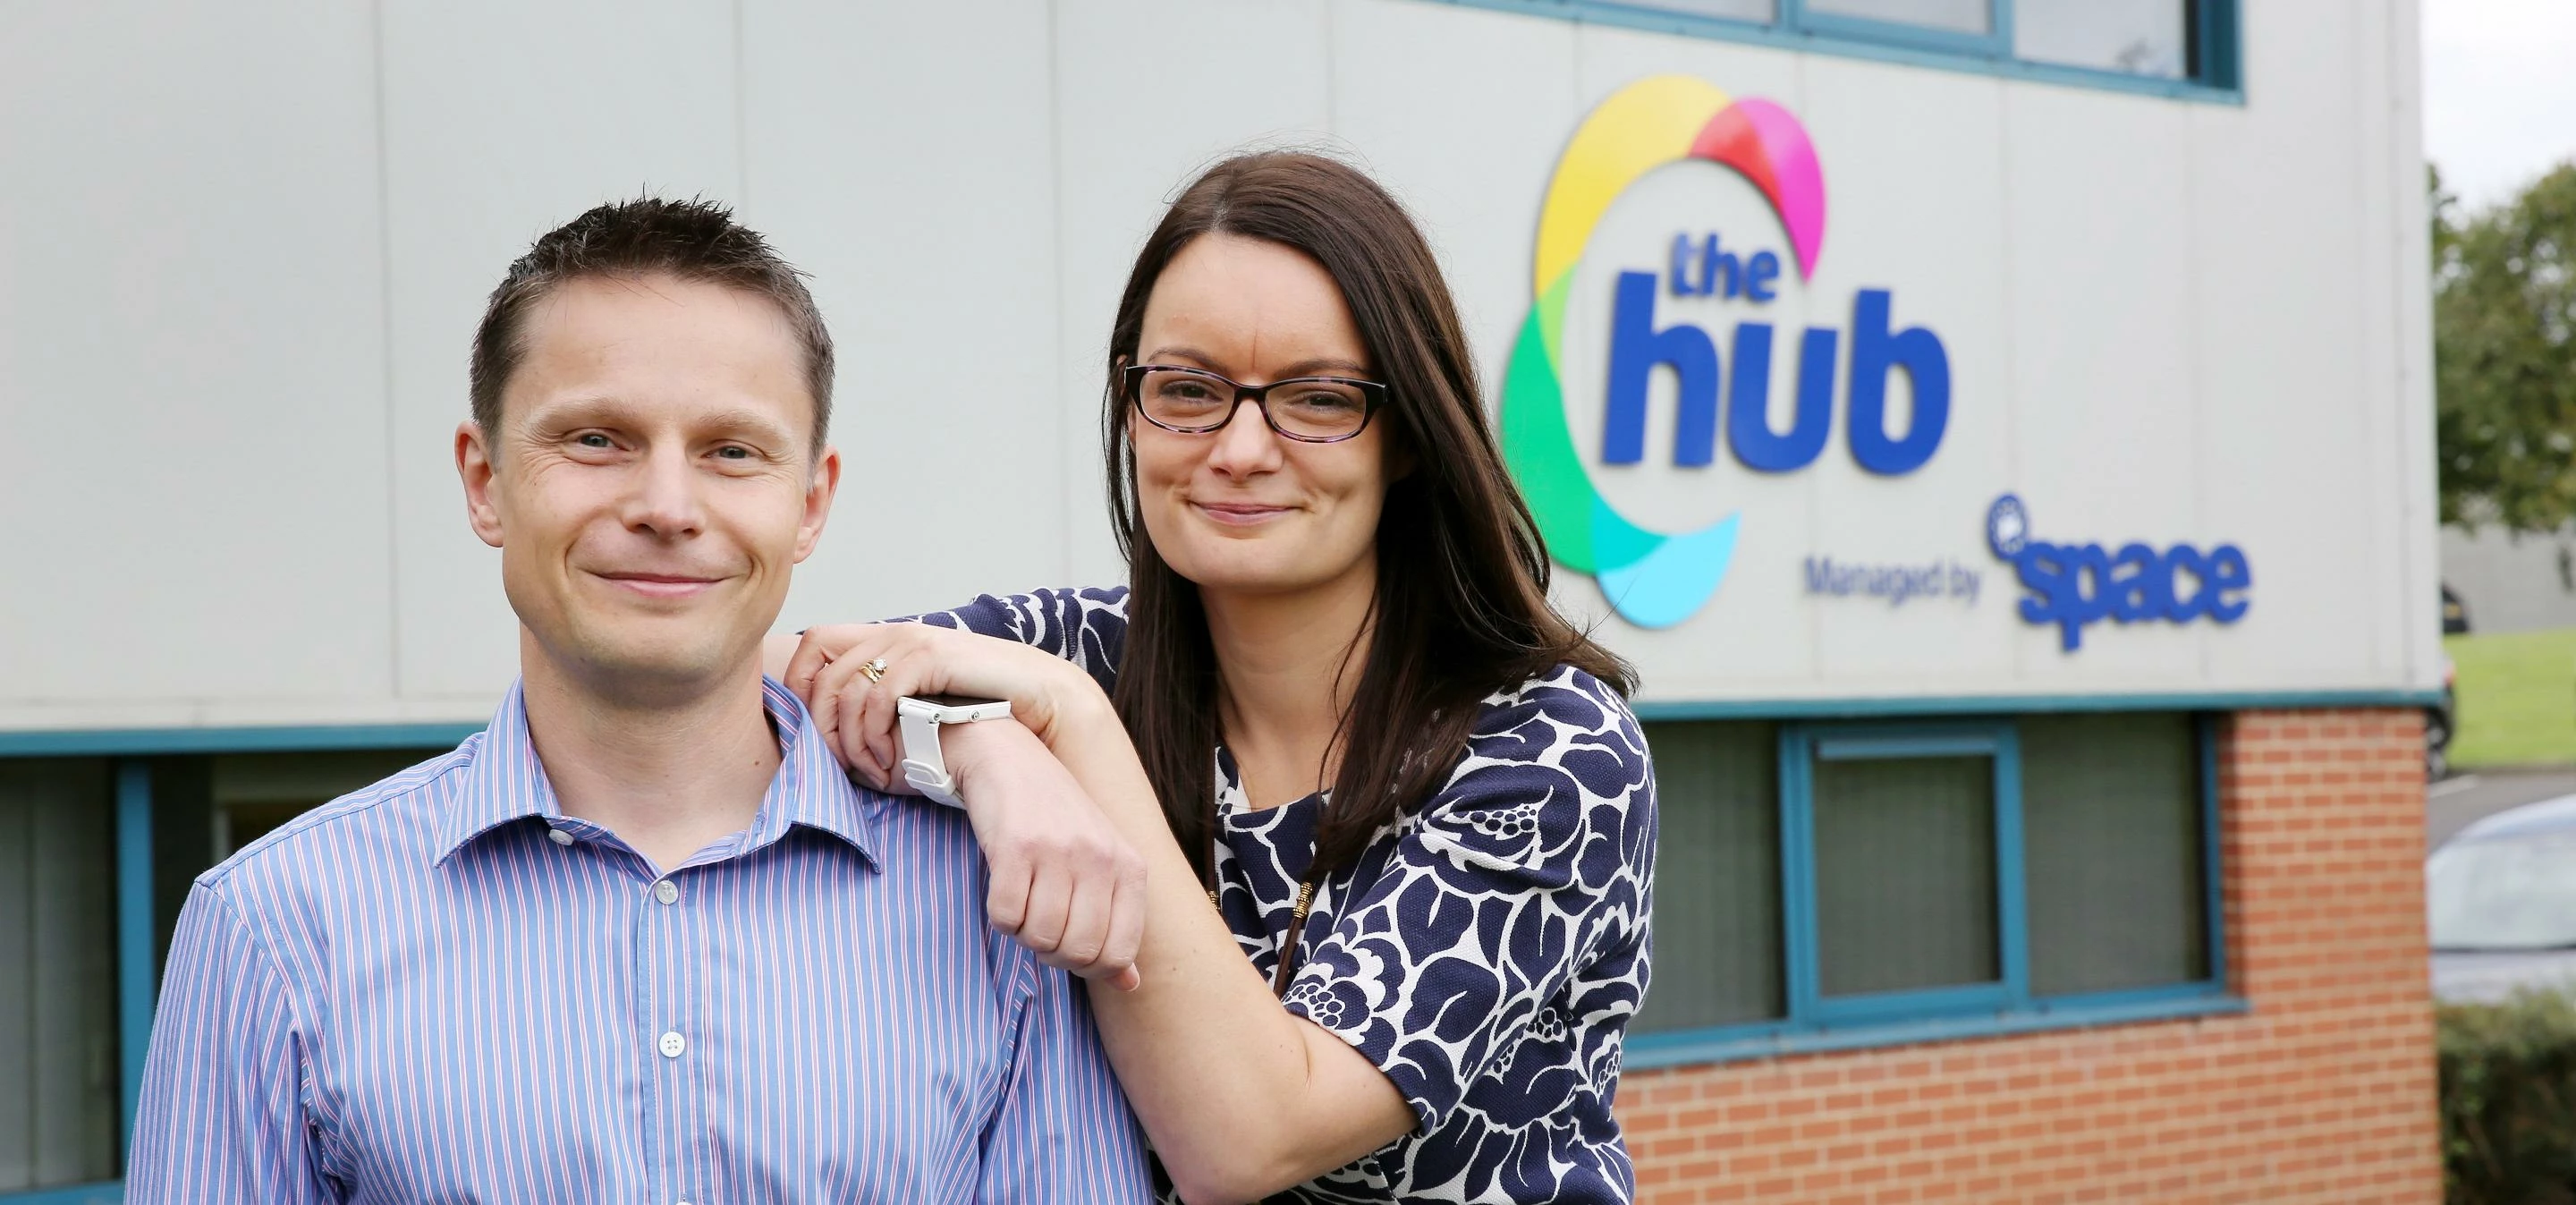 Stephen and Julie Relf of Applause Accountancy who have moved their business from home to The Hub in